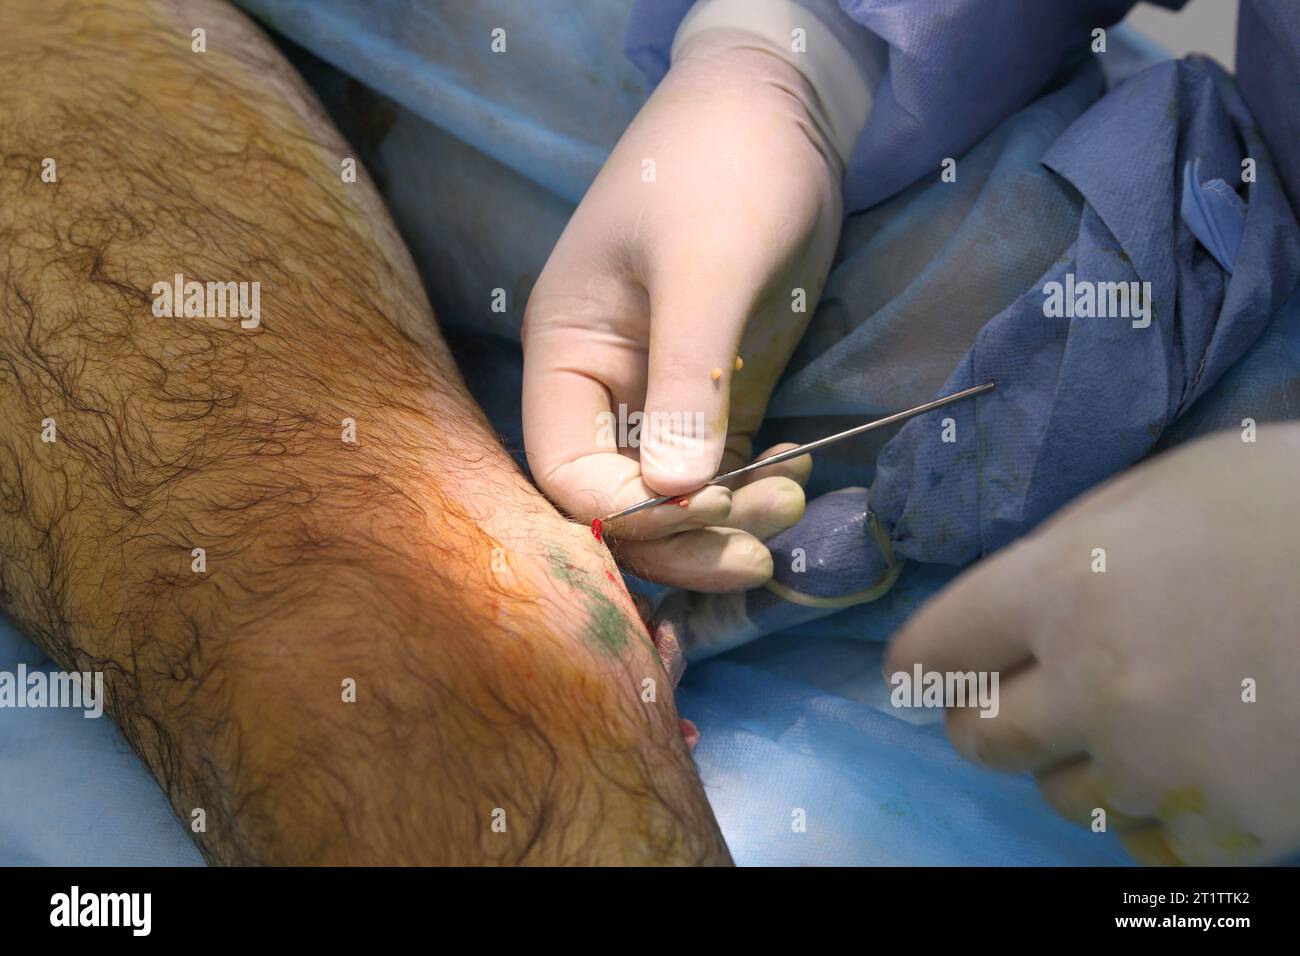 Medical surgery for endovenous laser photocoagulation of the great saphenous vein. Miniphlegectomy. Endovenous laser coagulation vein. Stock Photo